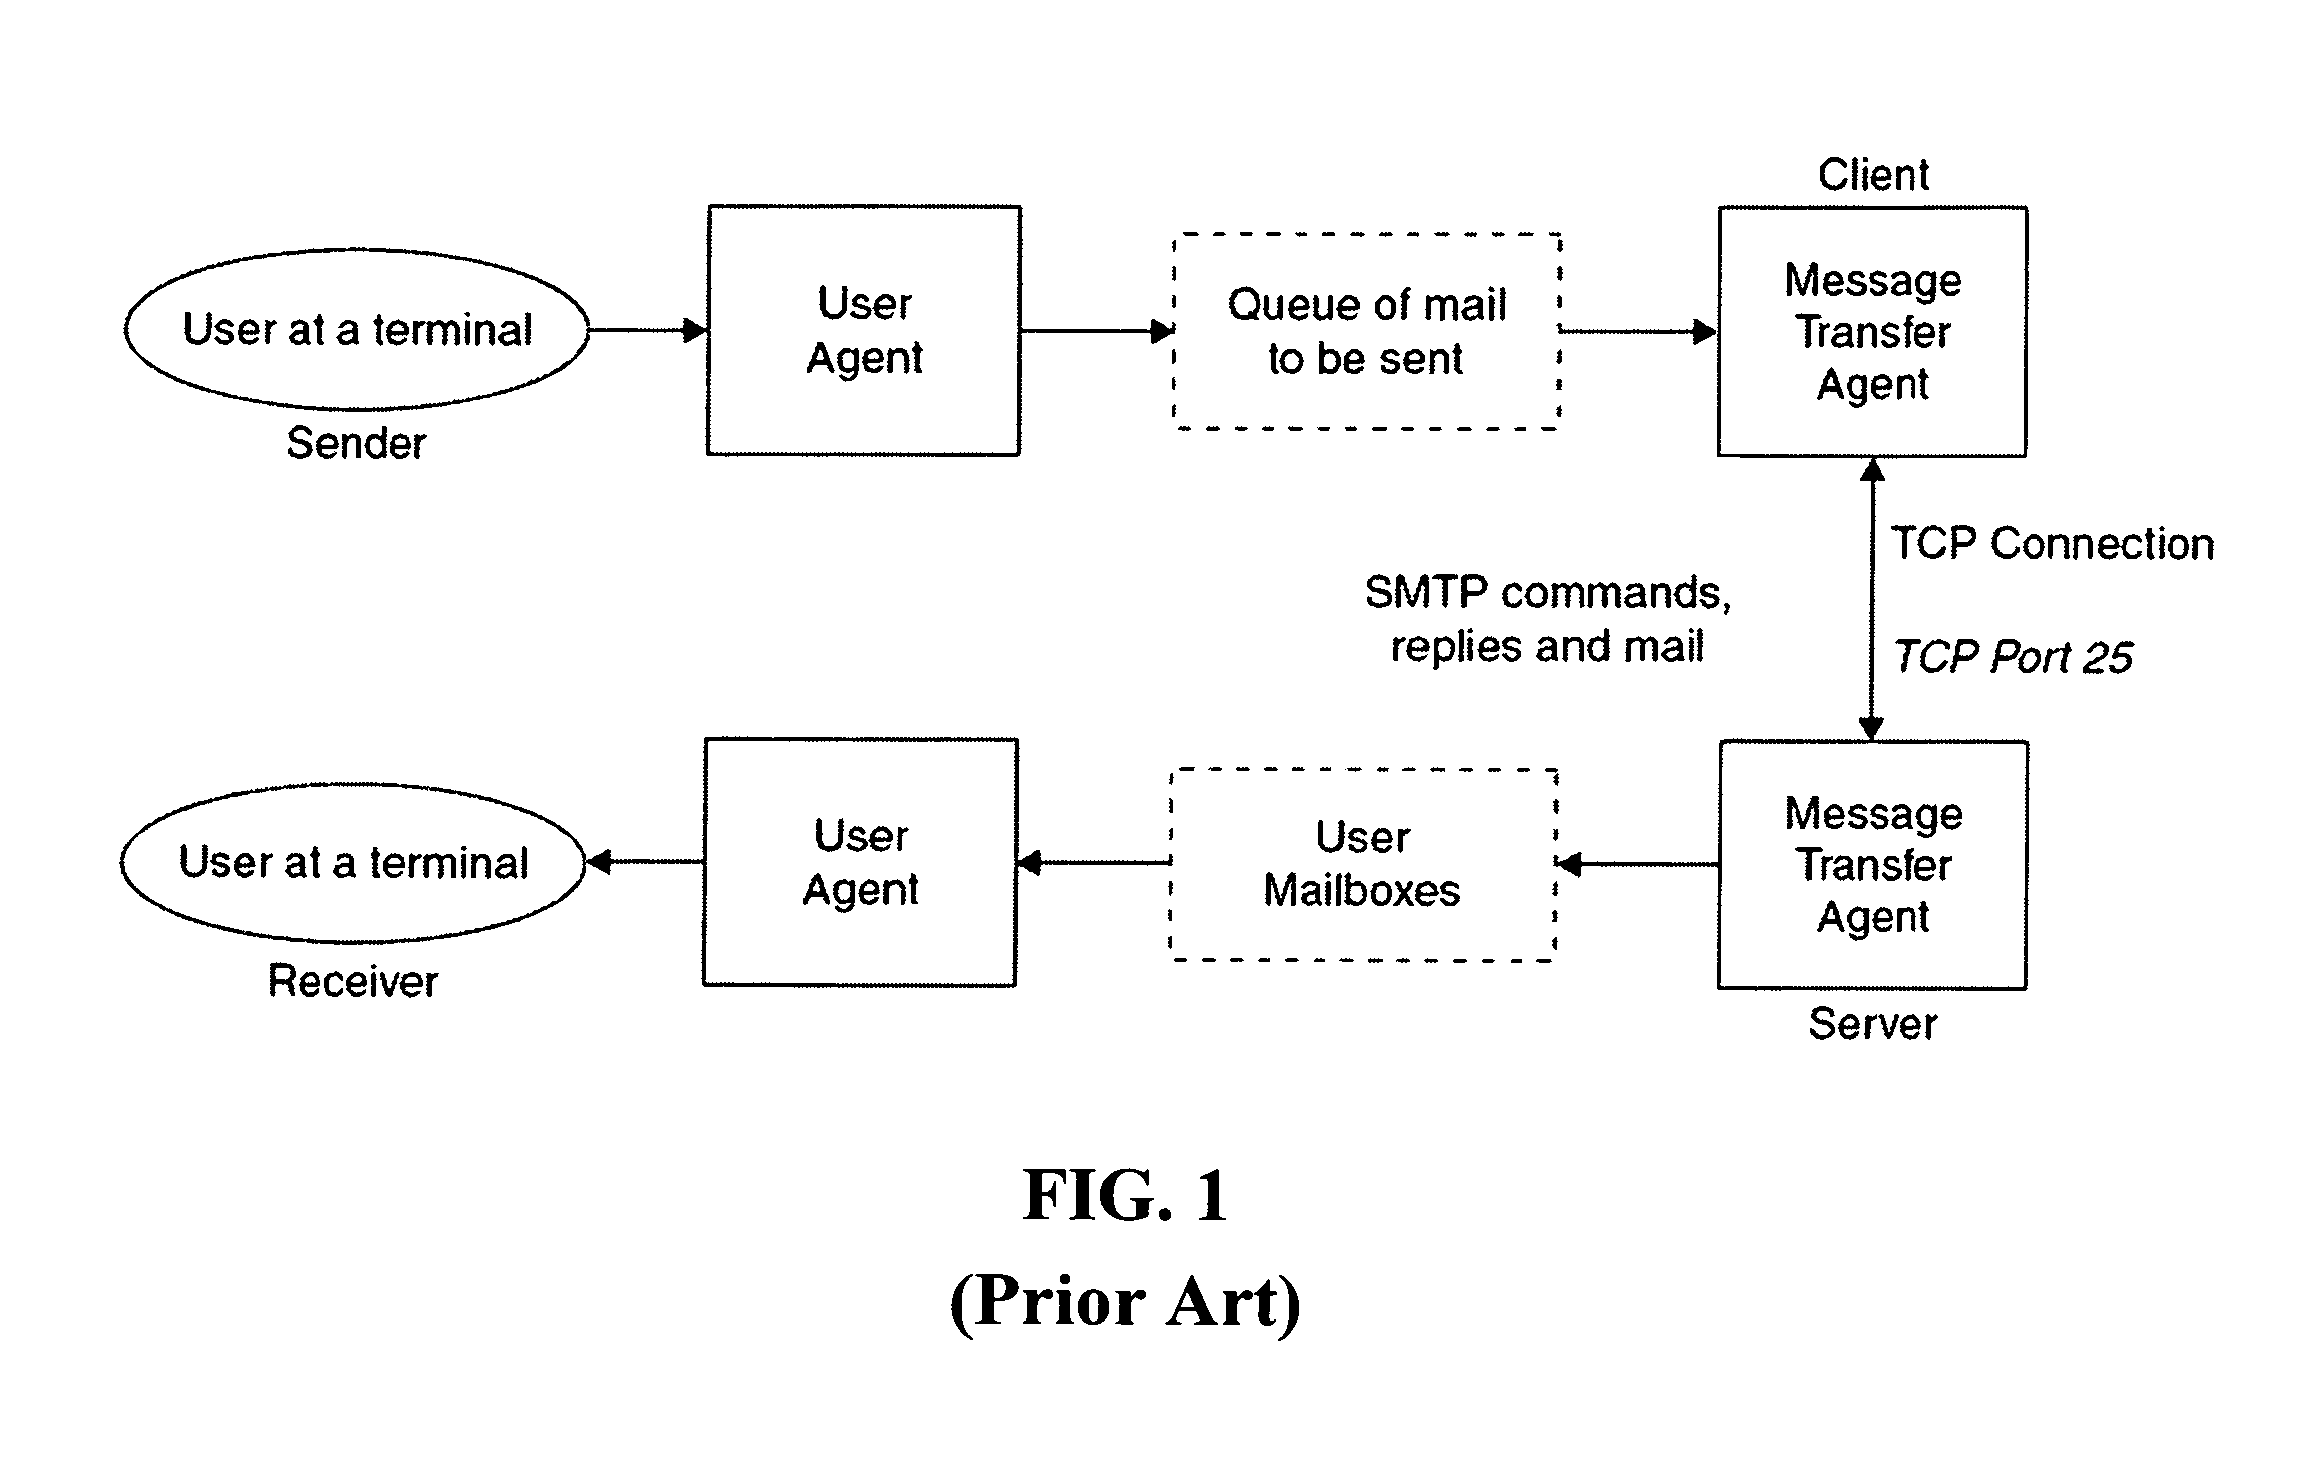 Systems and methods for communicating logic in e-mail messages